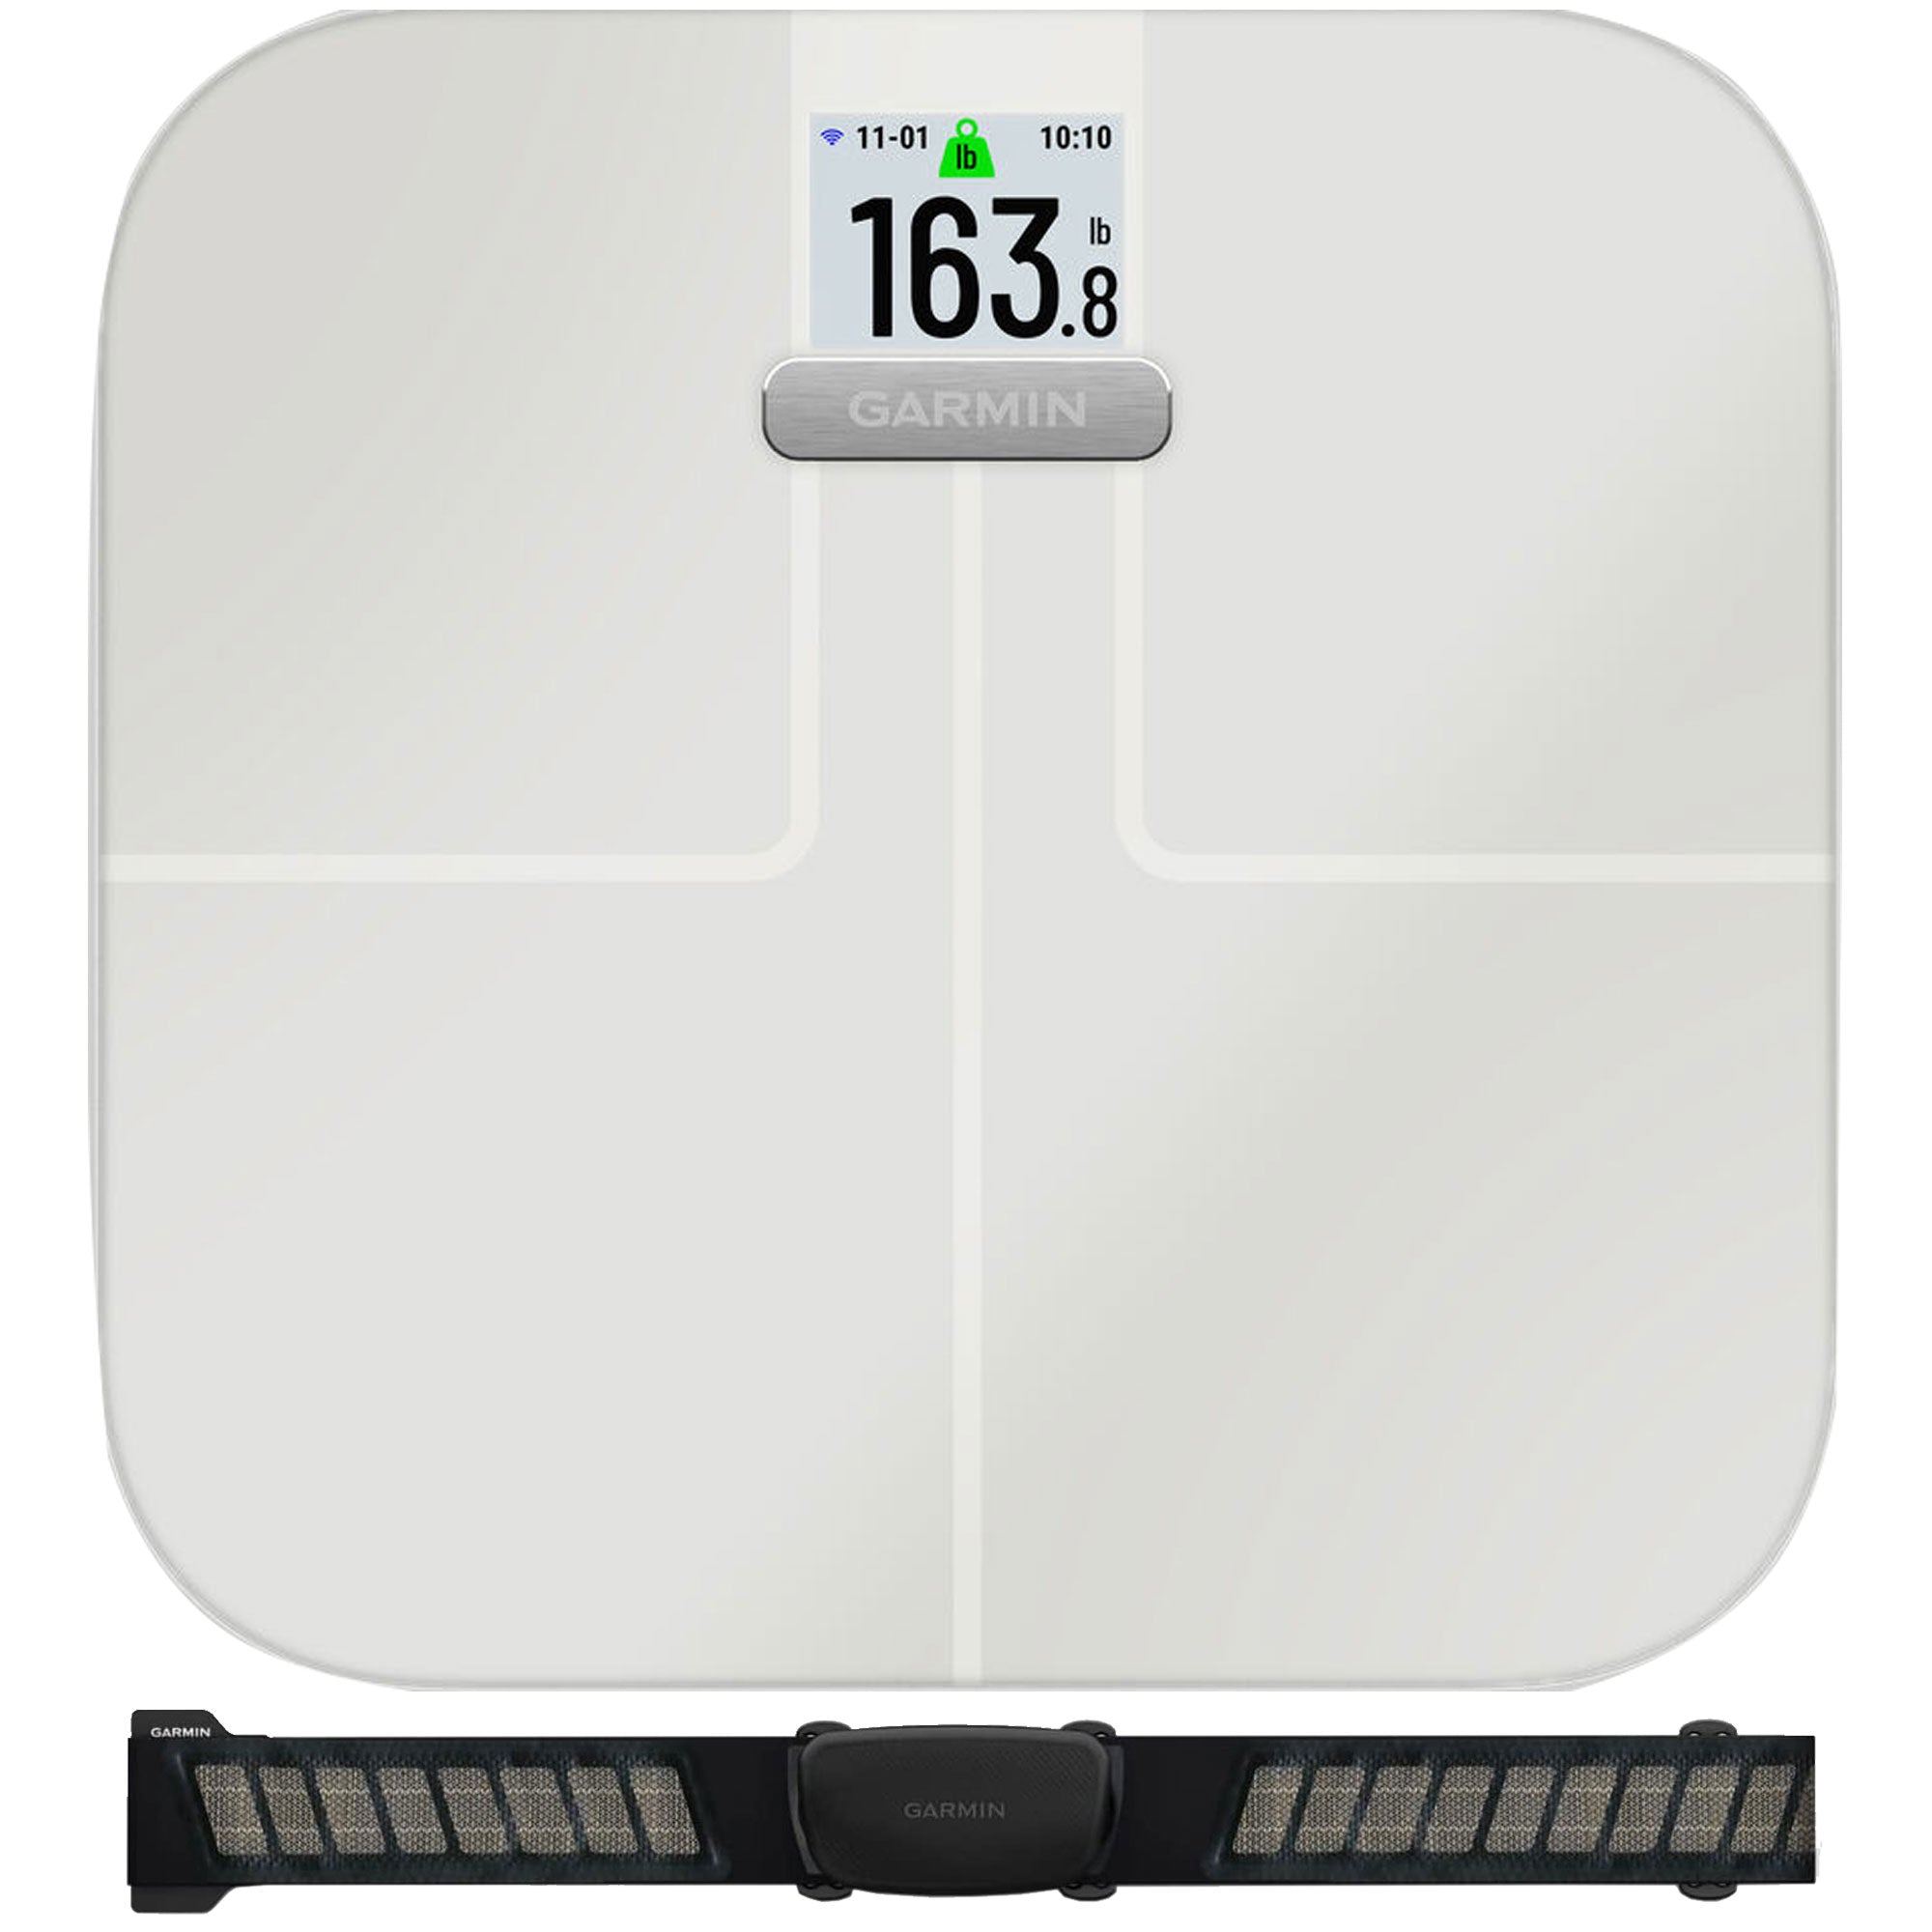 accelerator interview Gå vandreture Garmin Index S2 Smart Scale with Wi-Fi Connectivity (White, Worldwide) –  The Teds Store